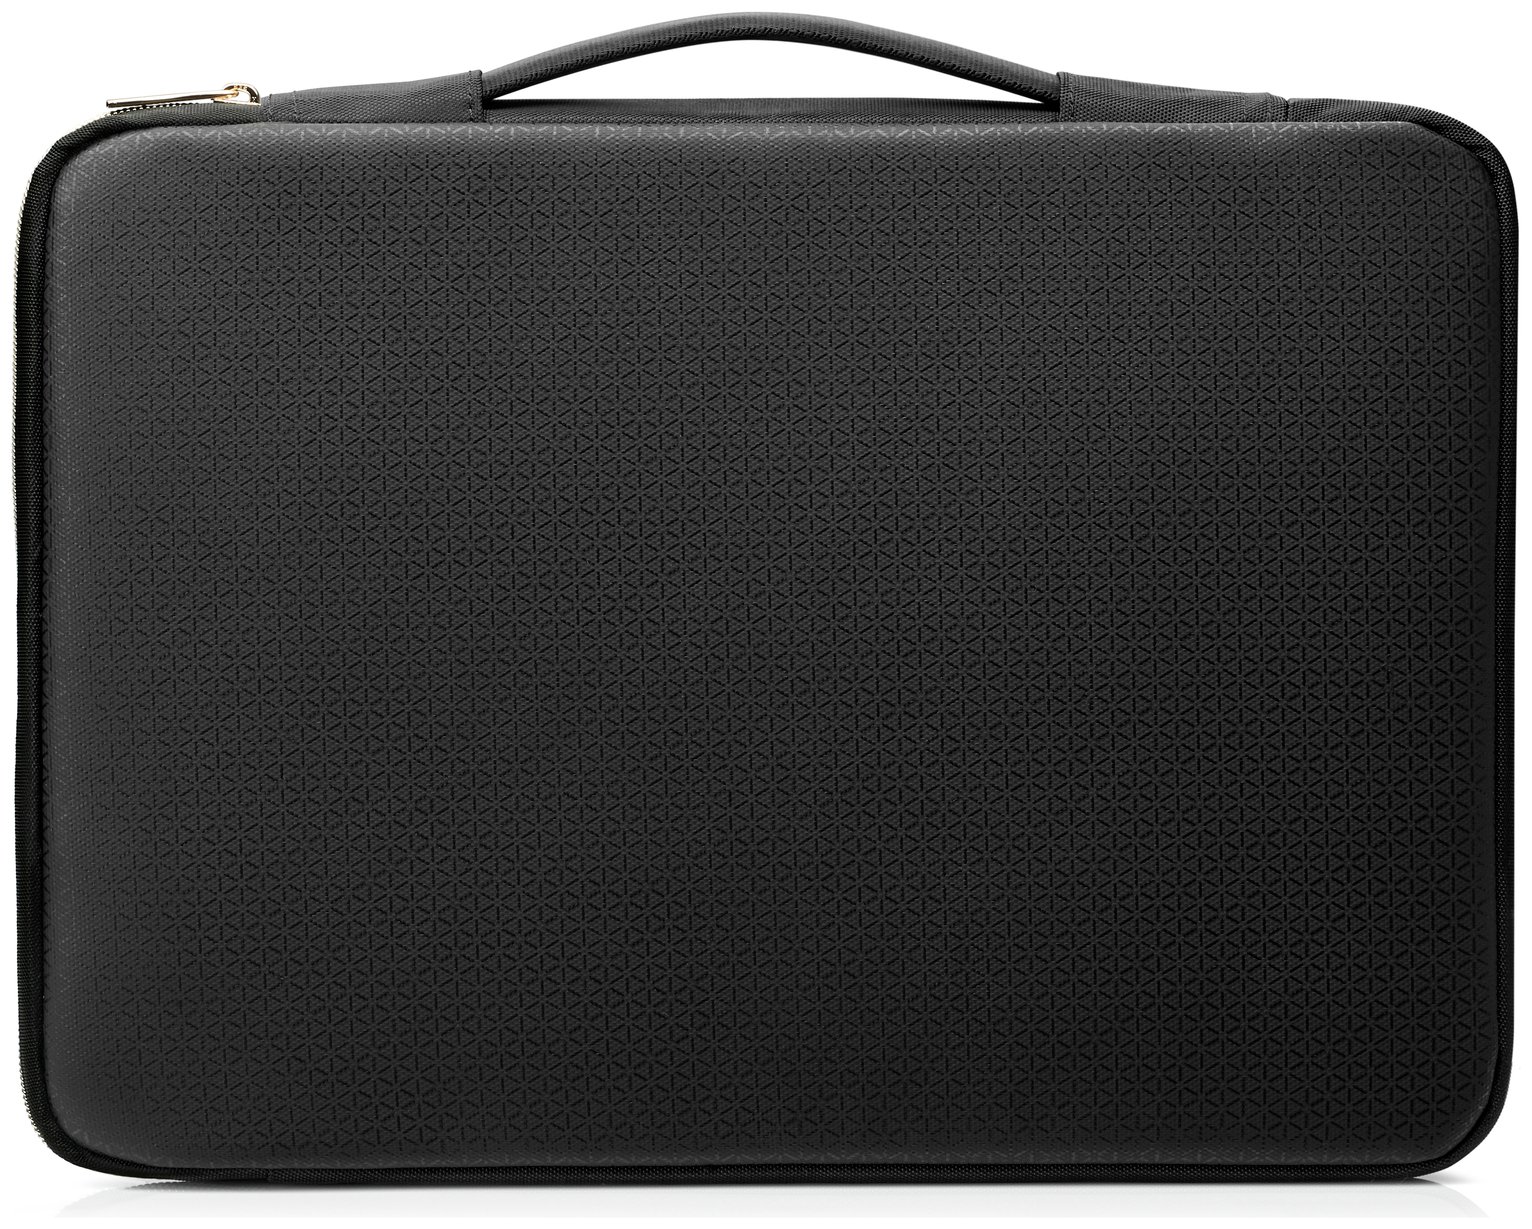 HP 15.6 Inch Laptop Sleeve Review